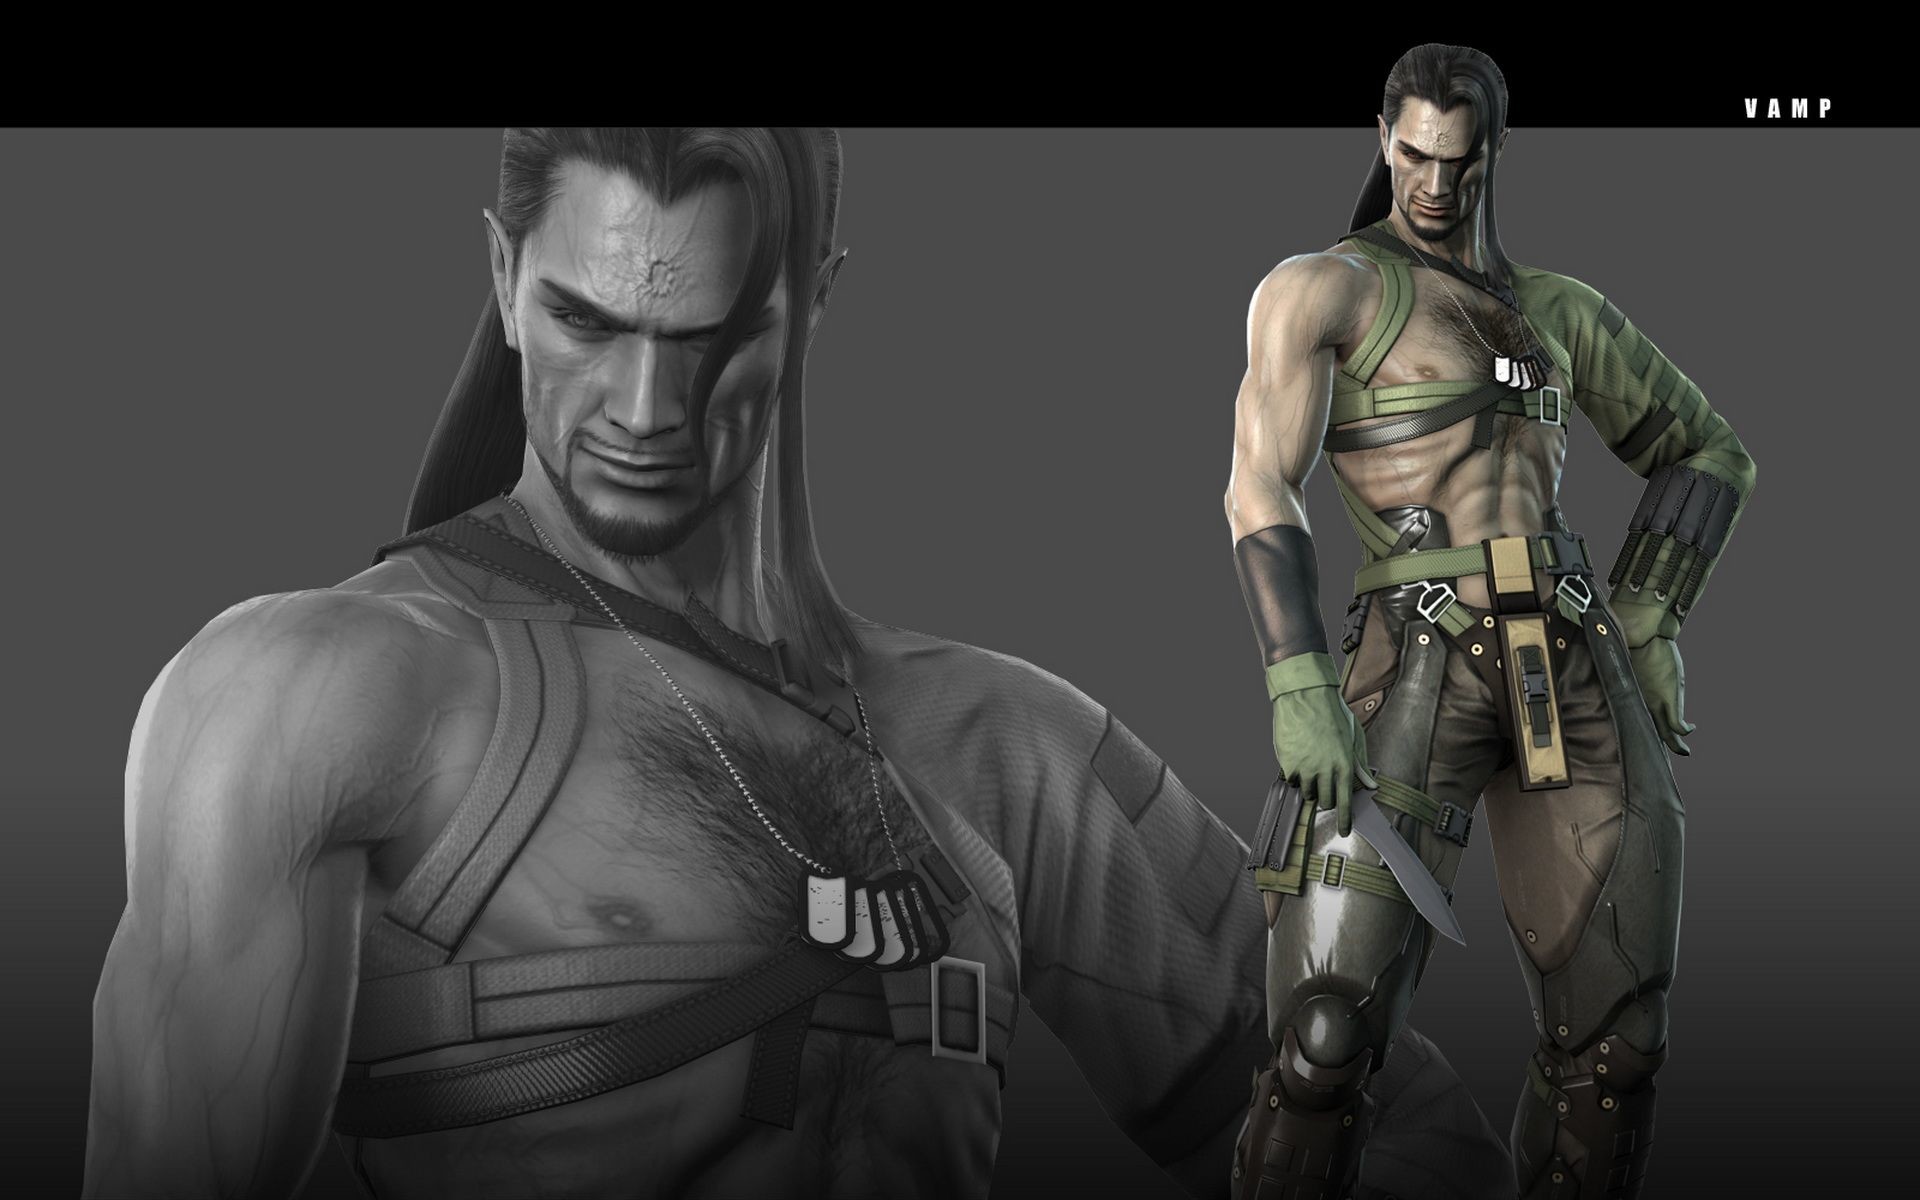 1920x1200 Note, if Anderson is too much for vamp, switch him out for Solidus Snake  instead.